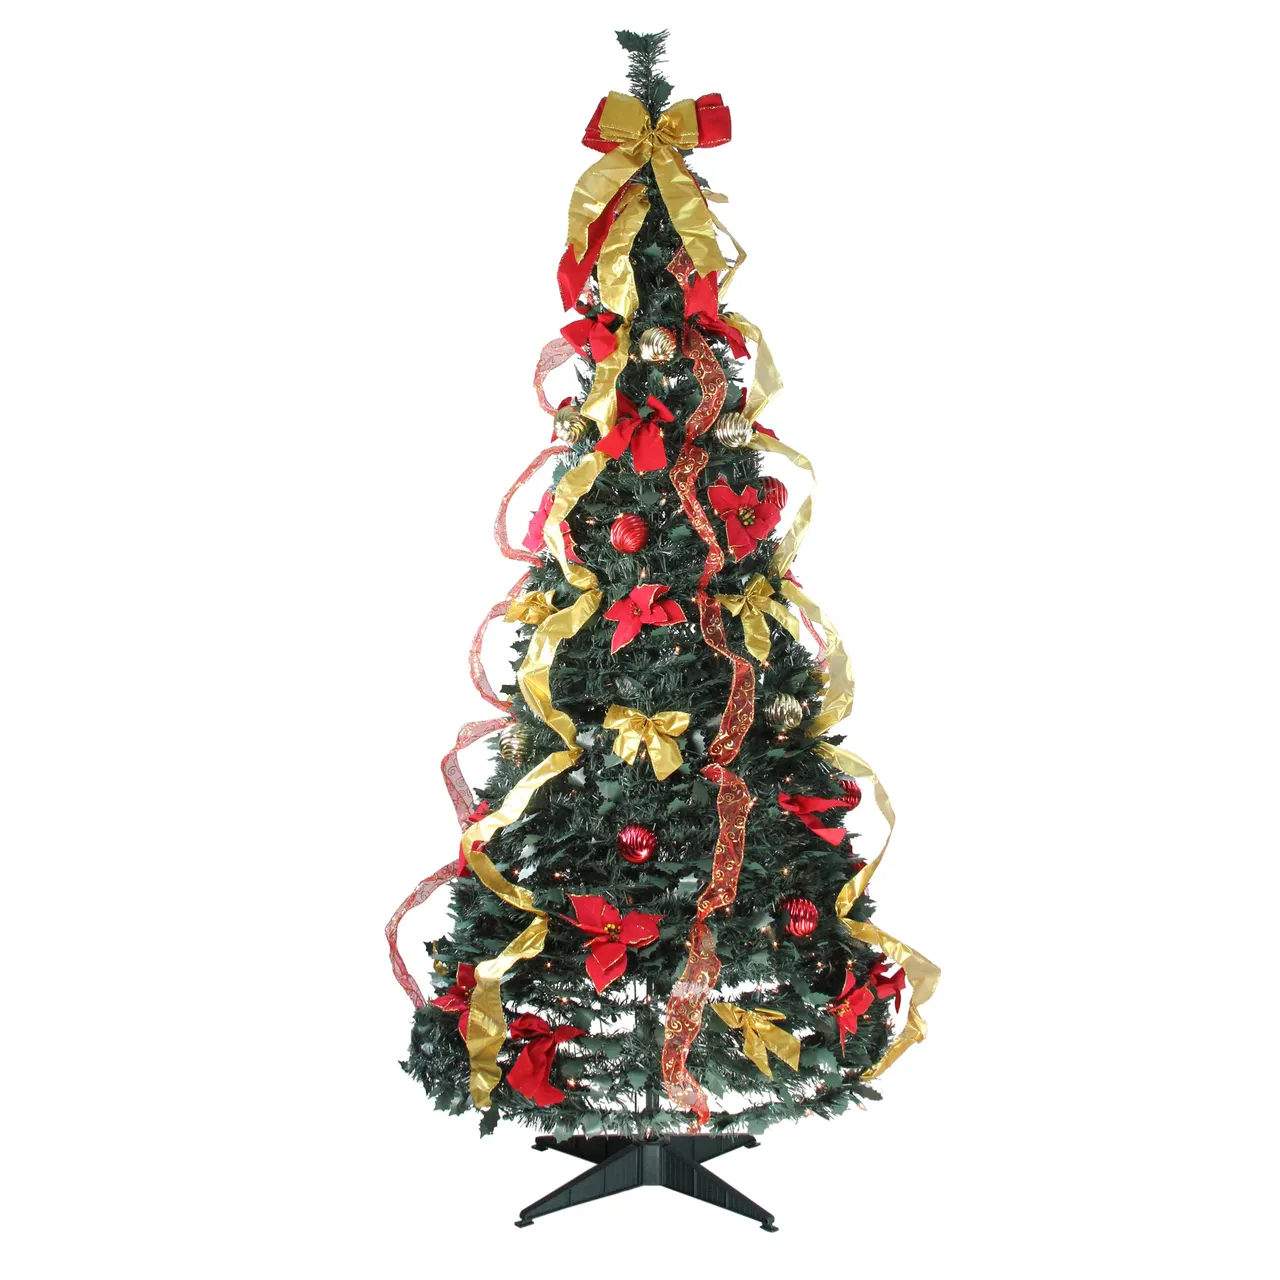 6' Pre-Lit Gold and Red Artificial Christmas Pre-Decorated Pop-Up Tree with 350 clear mini lights